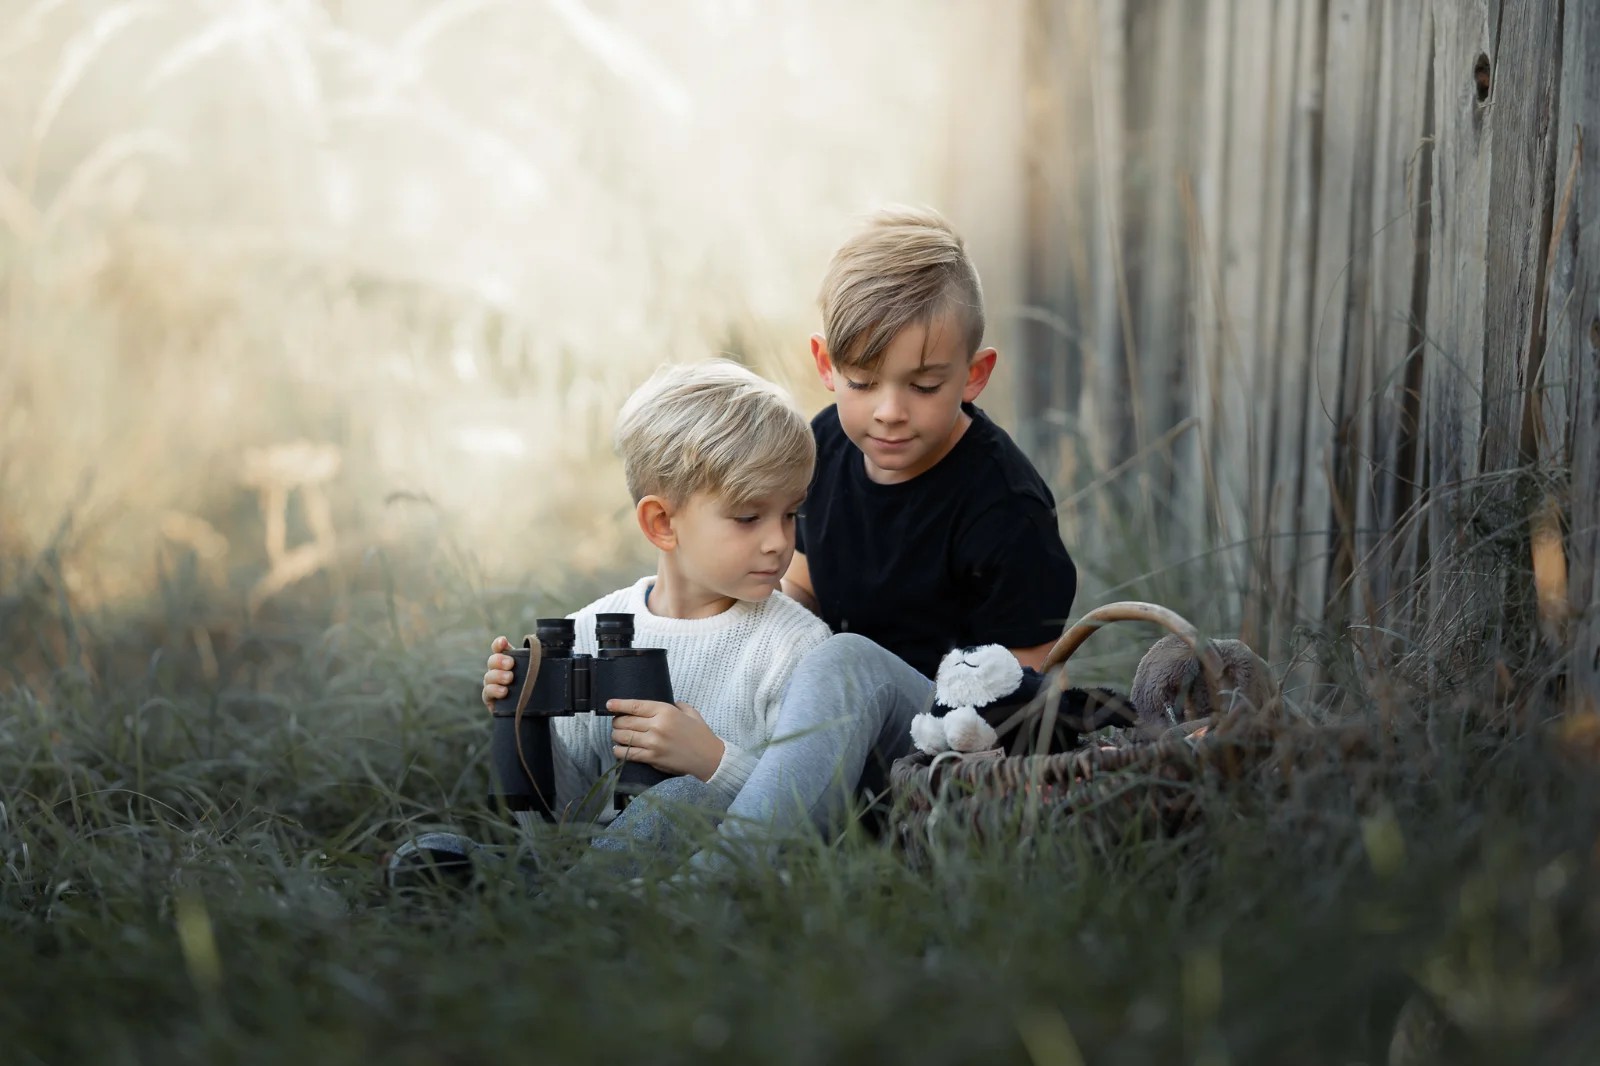 10 Awesome Children Photography Settings, Poses And Ideas To Capture Magical Moments For Families